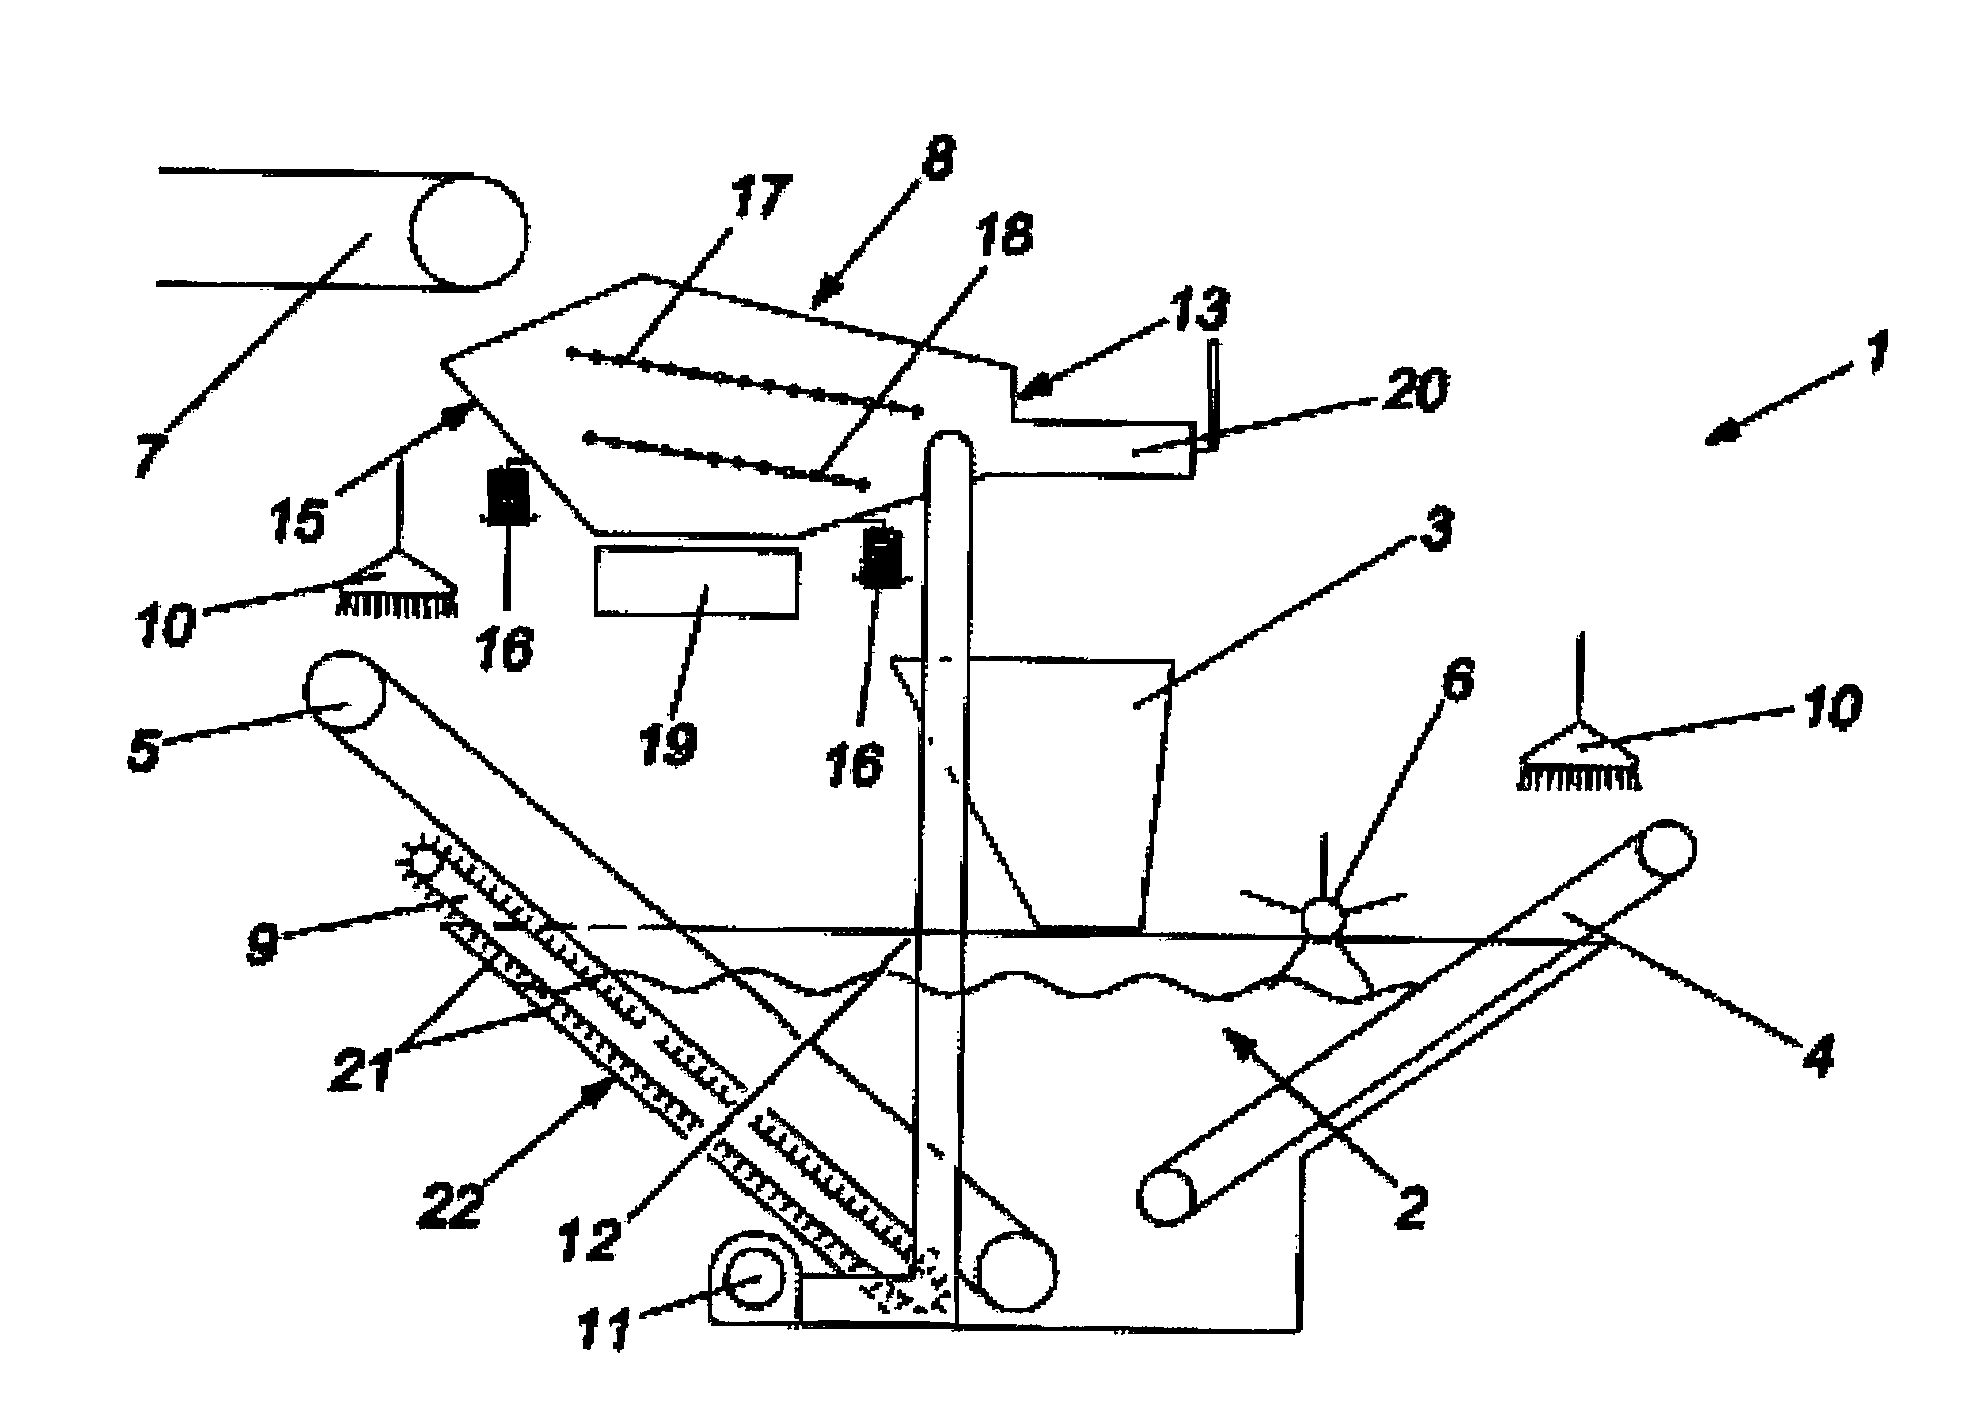 Device for the separation of waste materials in accordance with their densities